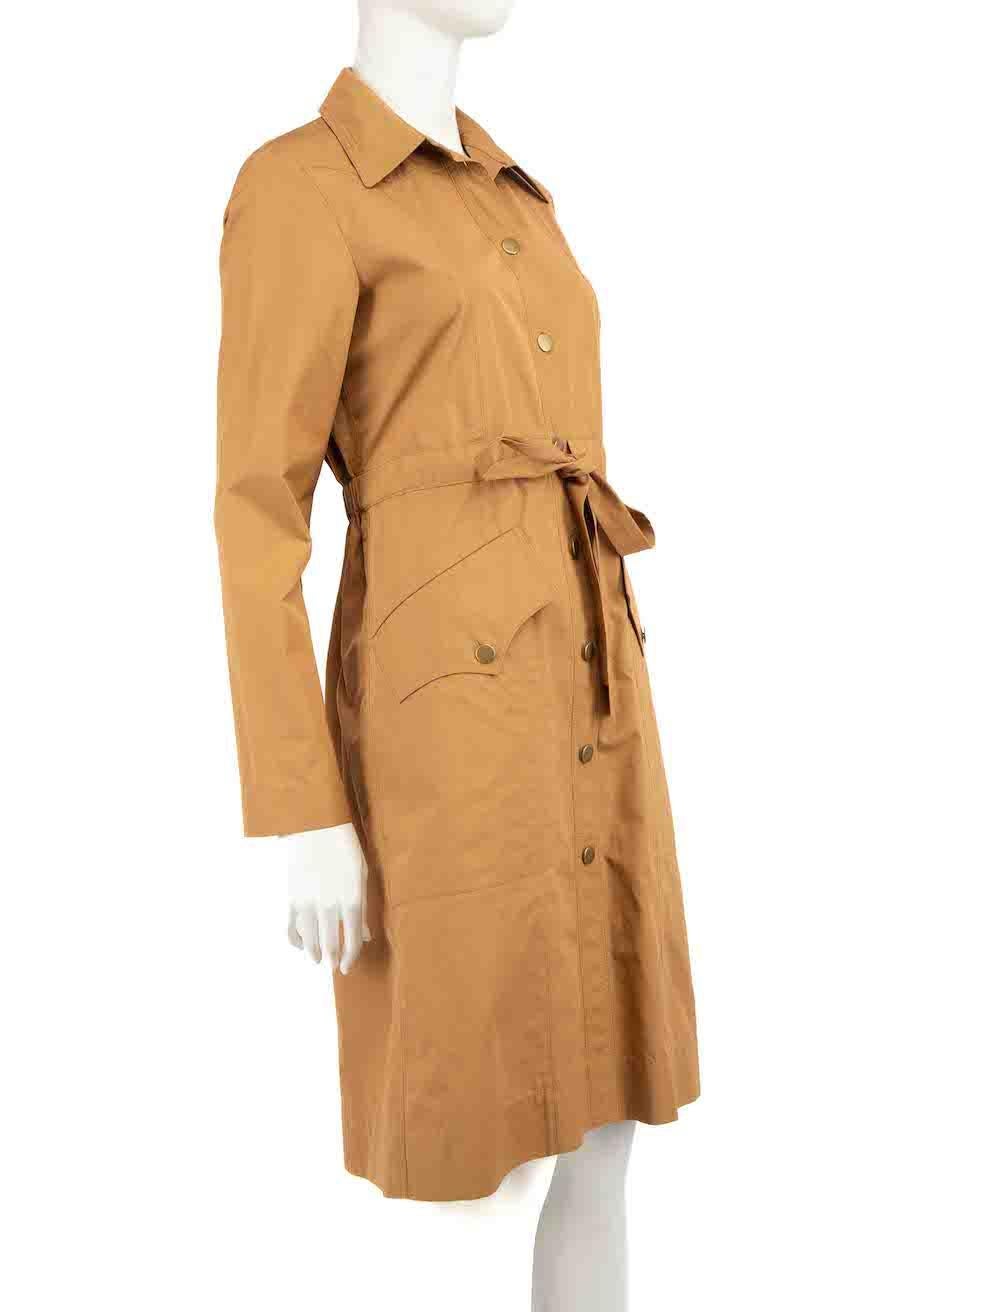 CONDITION is Very good. Hardly any visible wear to dress is evident on this used Sonia Rykiel designer resale item.
 
 Details
 Brown
 Cotton
 Shirt dress
 Midi length
 Front button up closure
 Collared
 Long sleeves
 Tie strap belted
 2x Front side